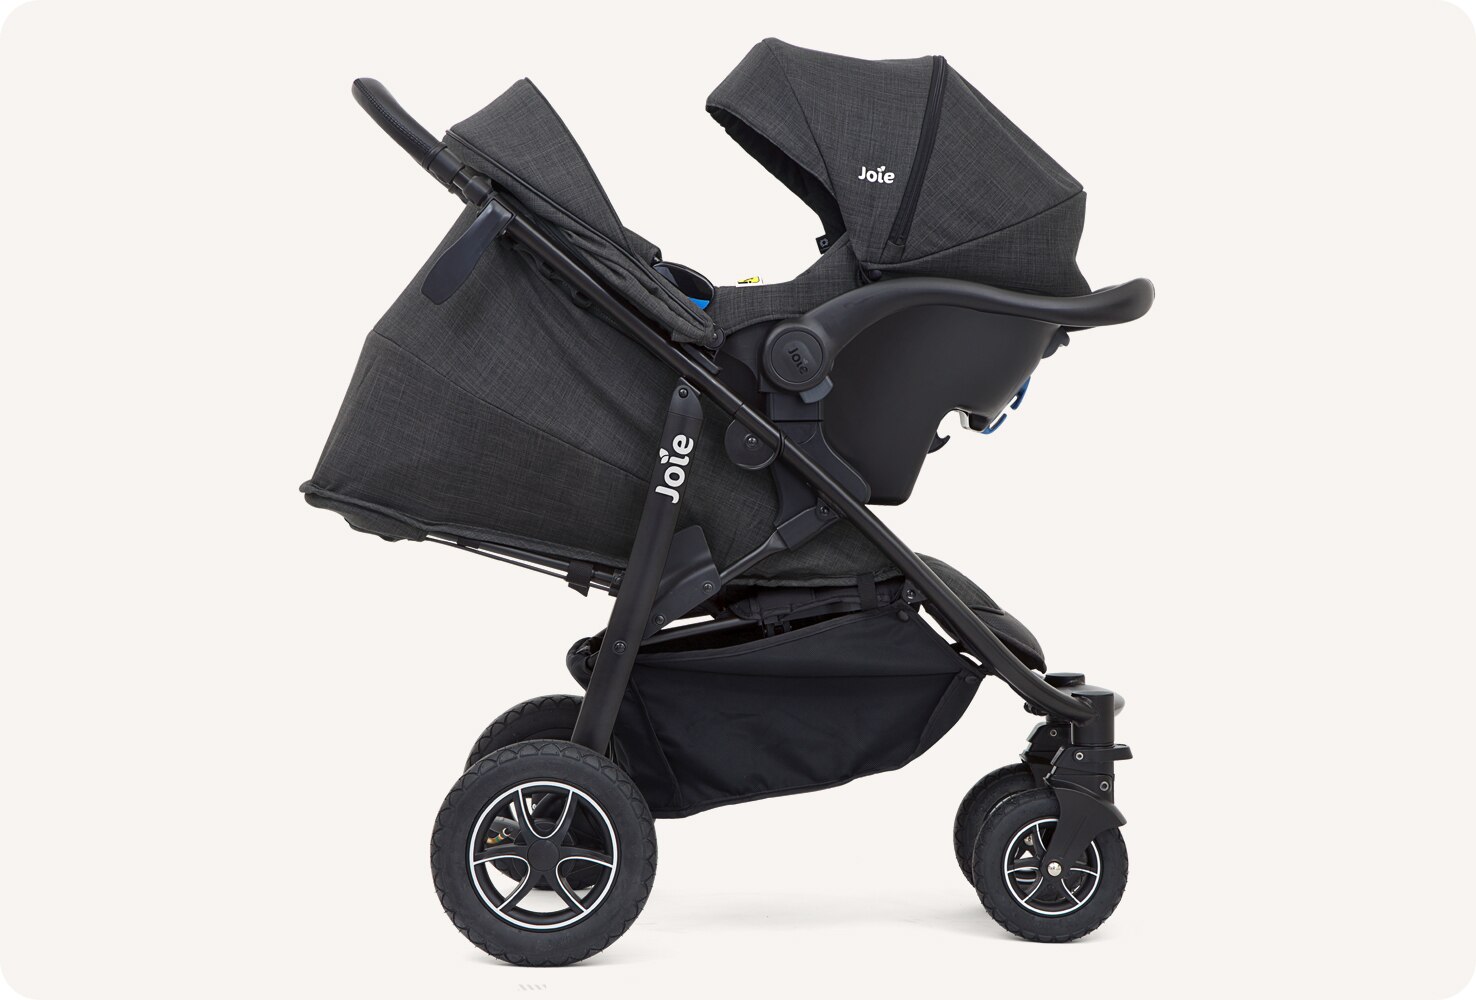  A black Joie Mytrax Flex stroller with matching infant car seat attached, from a side view.